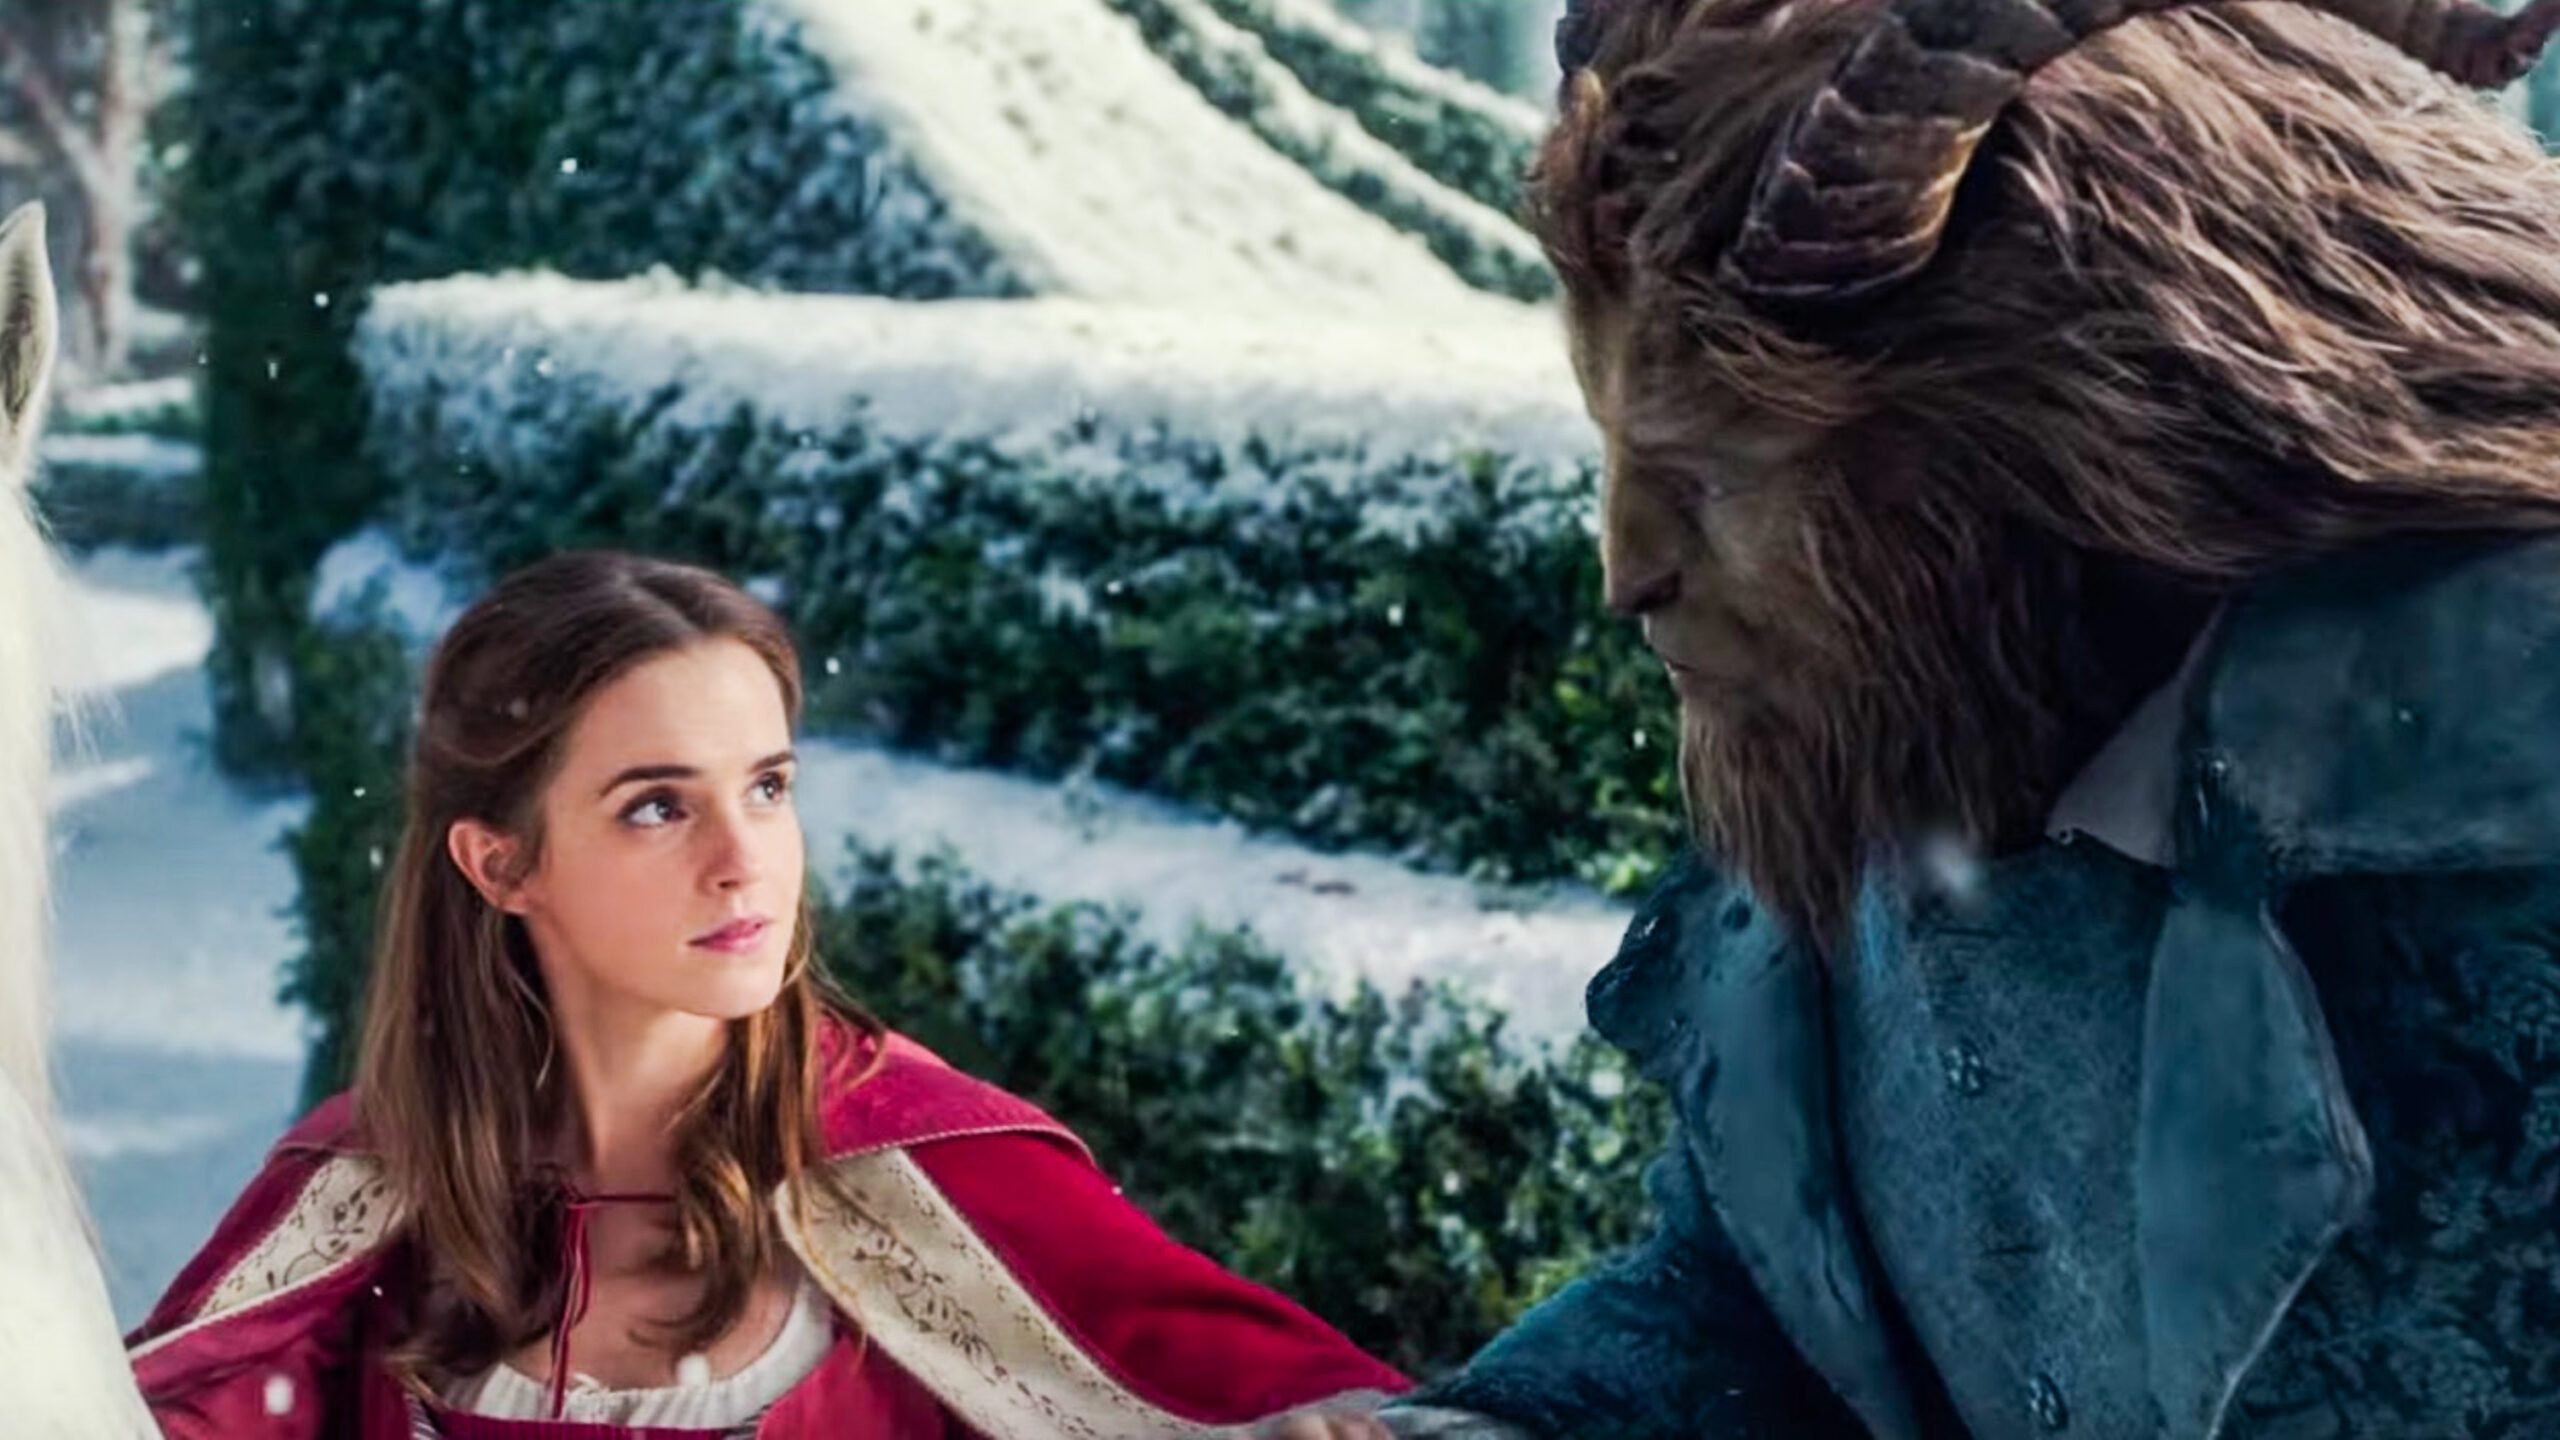 WATCH: New ‘Beauty and the Beast’ trailer unveils a ton of new footage